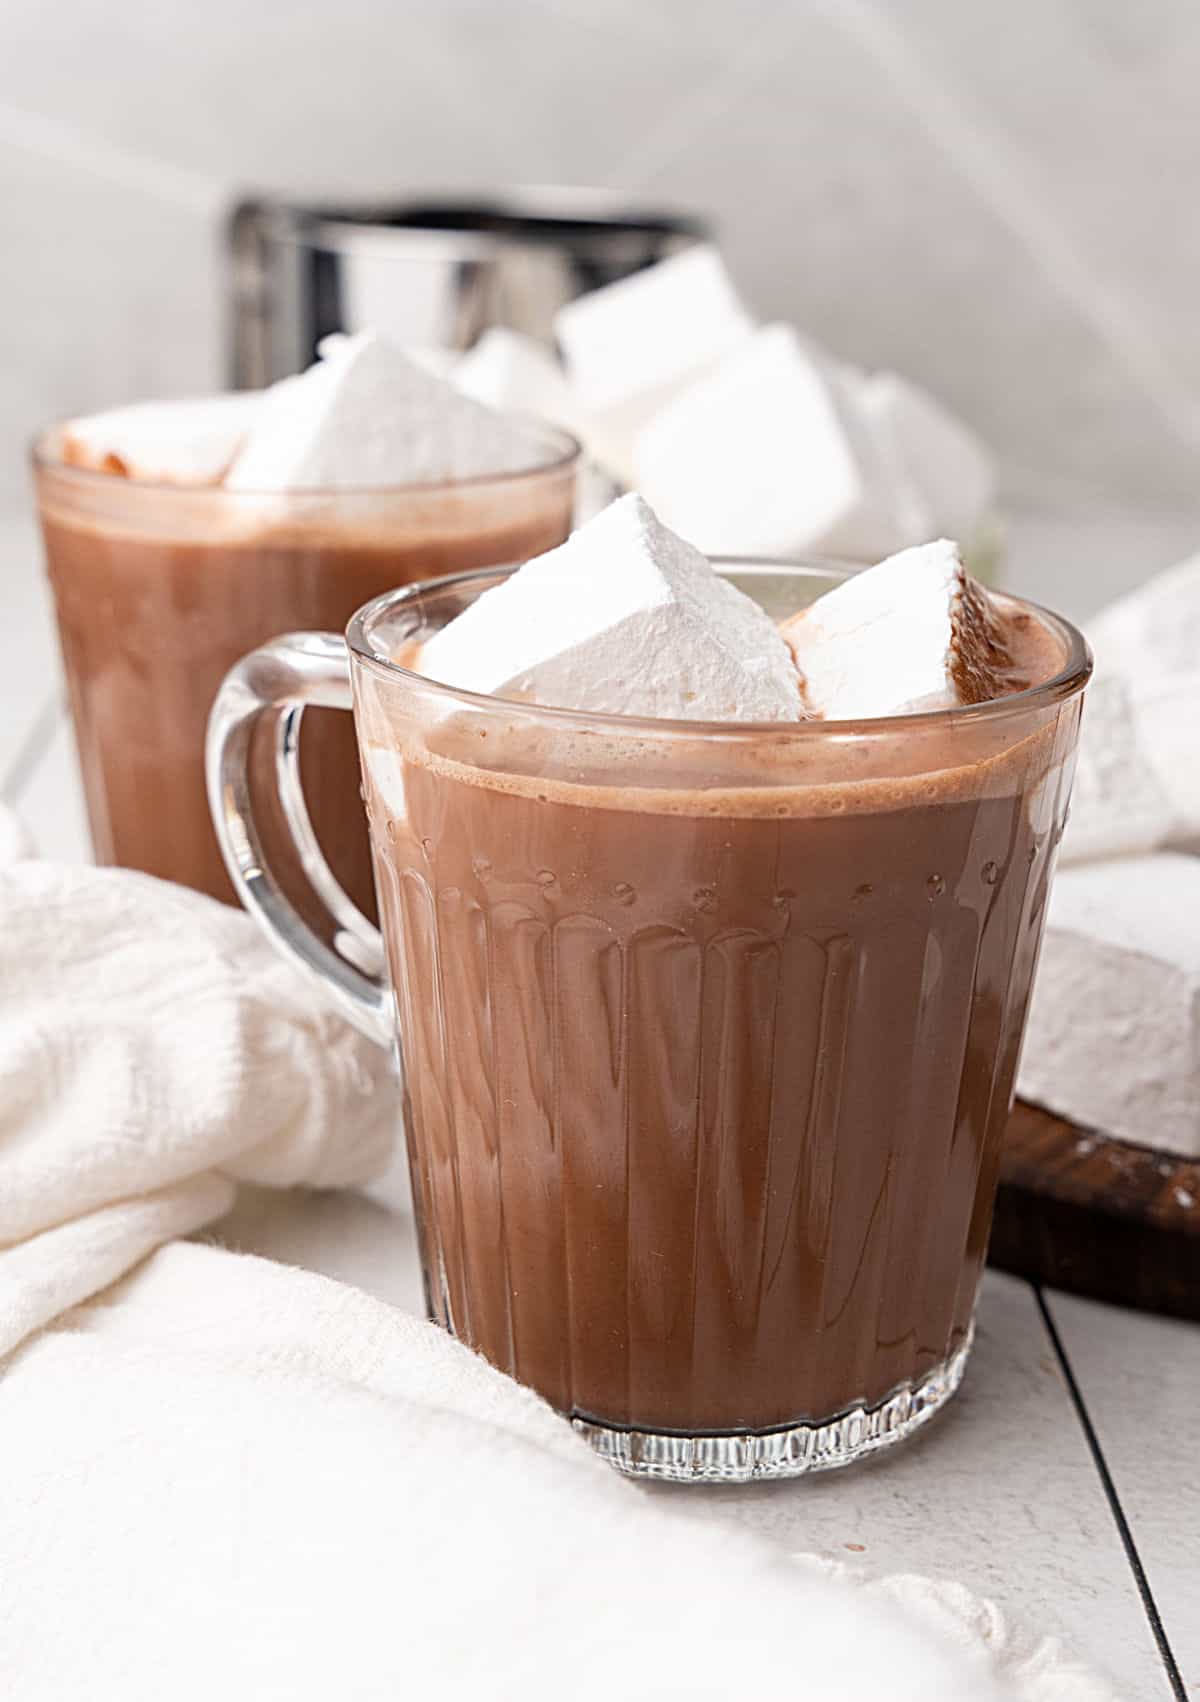 Two hot chocolate glass mugs with marshmallows. White cloth and surface, grey background.